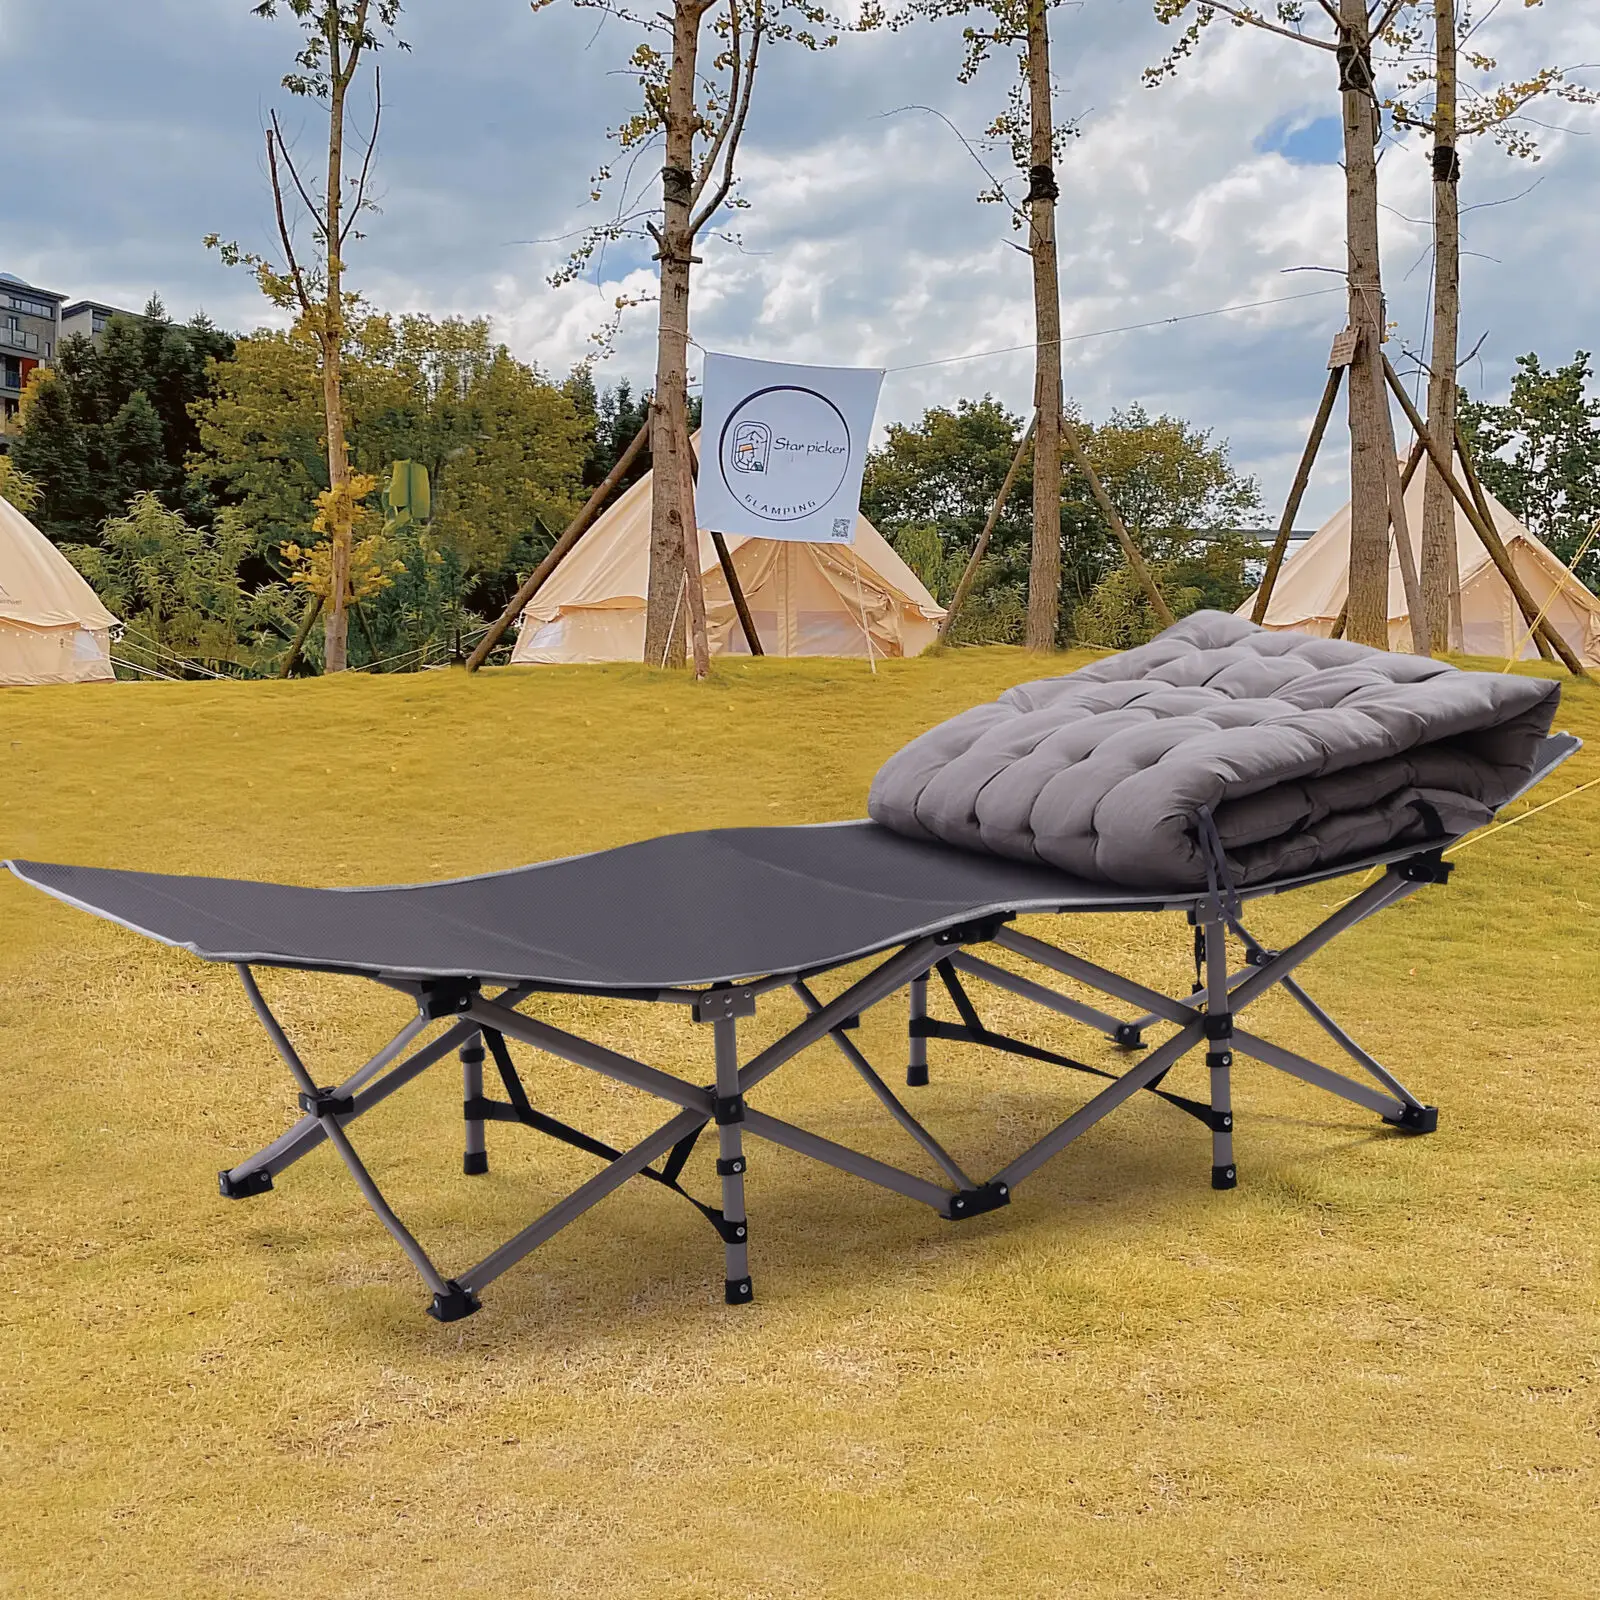 folding-camping-cot-portable-lounge-bed-outdoor-bed-office-sleeping-cot-for-hiking-sleeping-pads-for-hiking-traveling-hunting